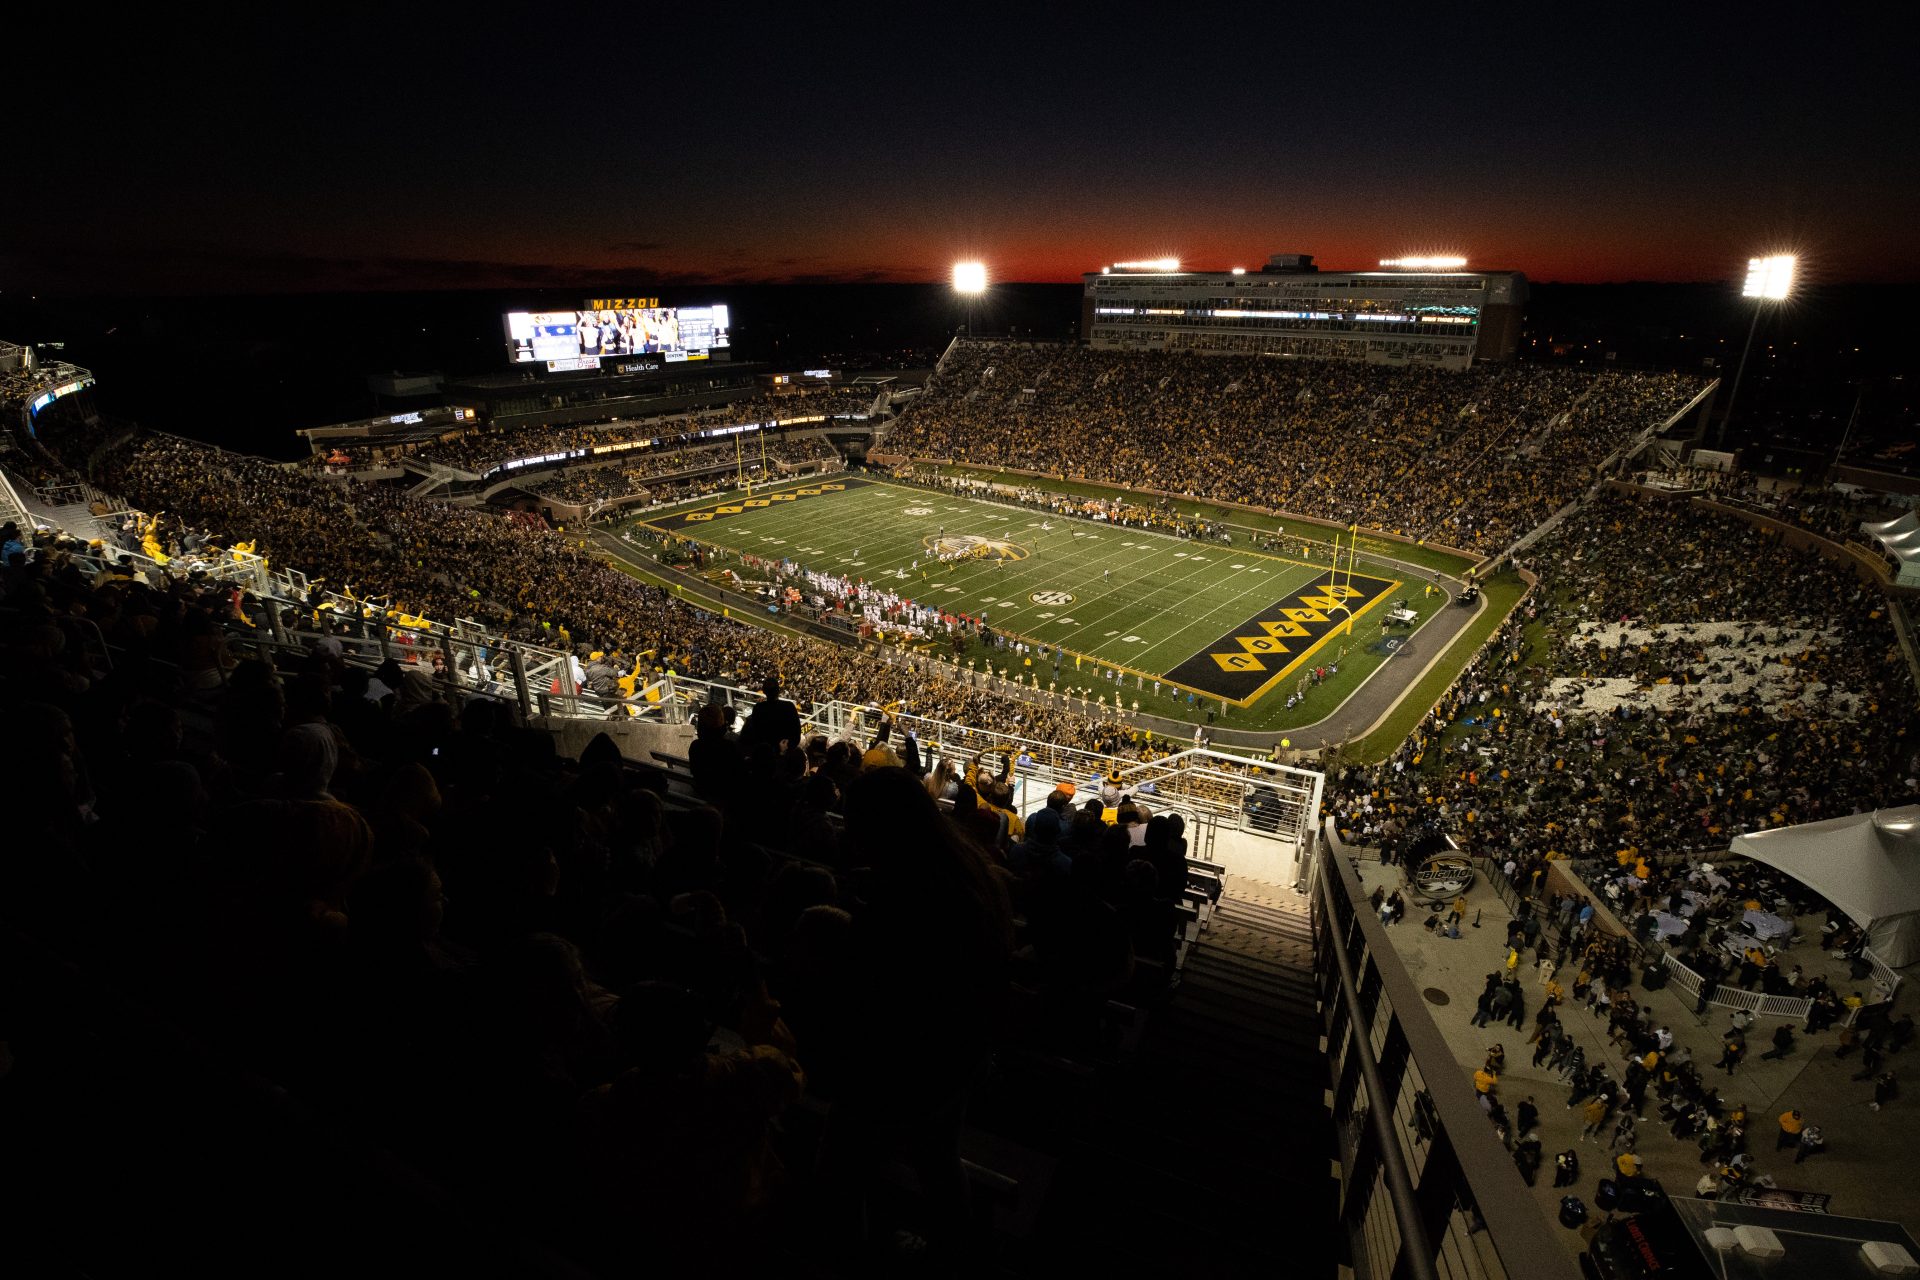 SEC Commissioner set to be in Columbia for tonight’s Mizzou game; expect heavy traffic